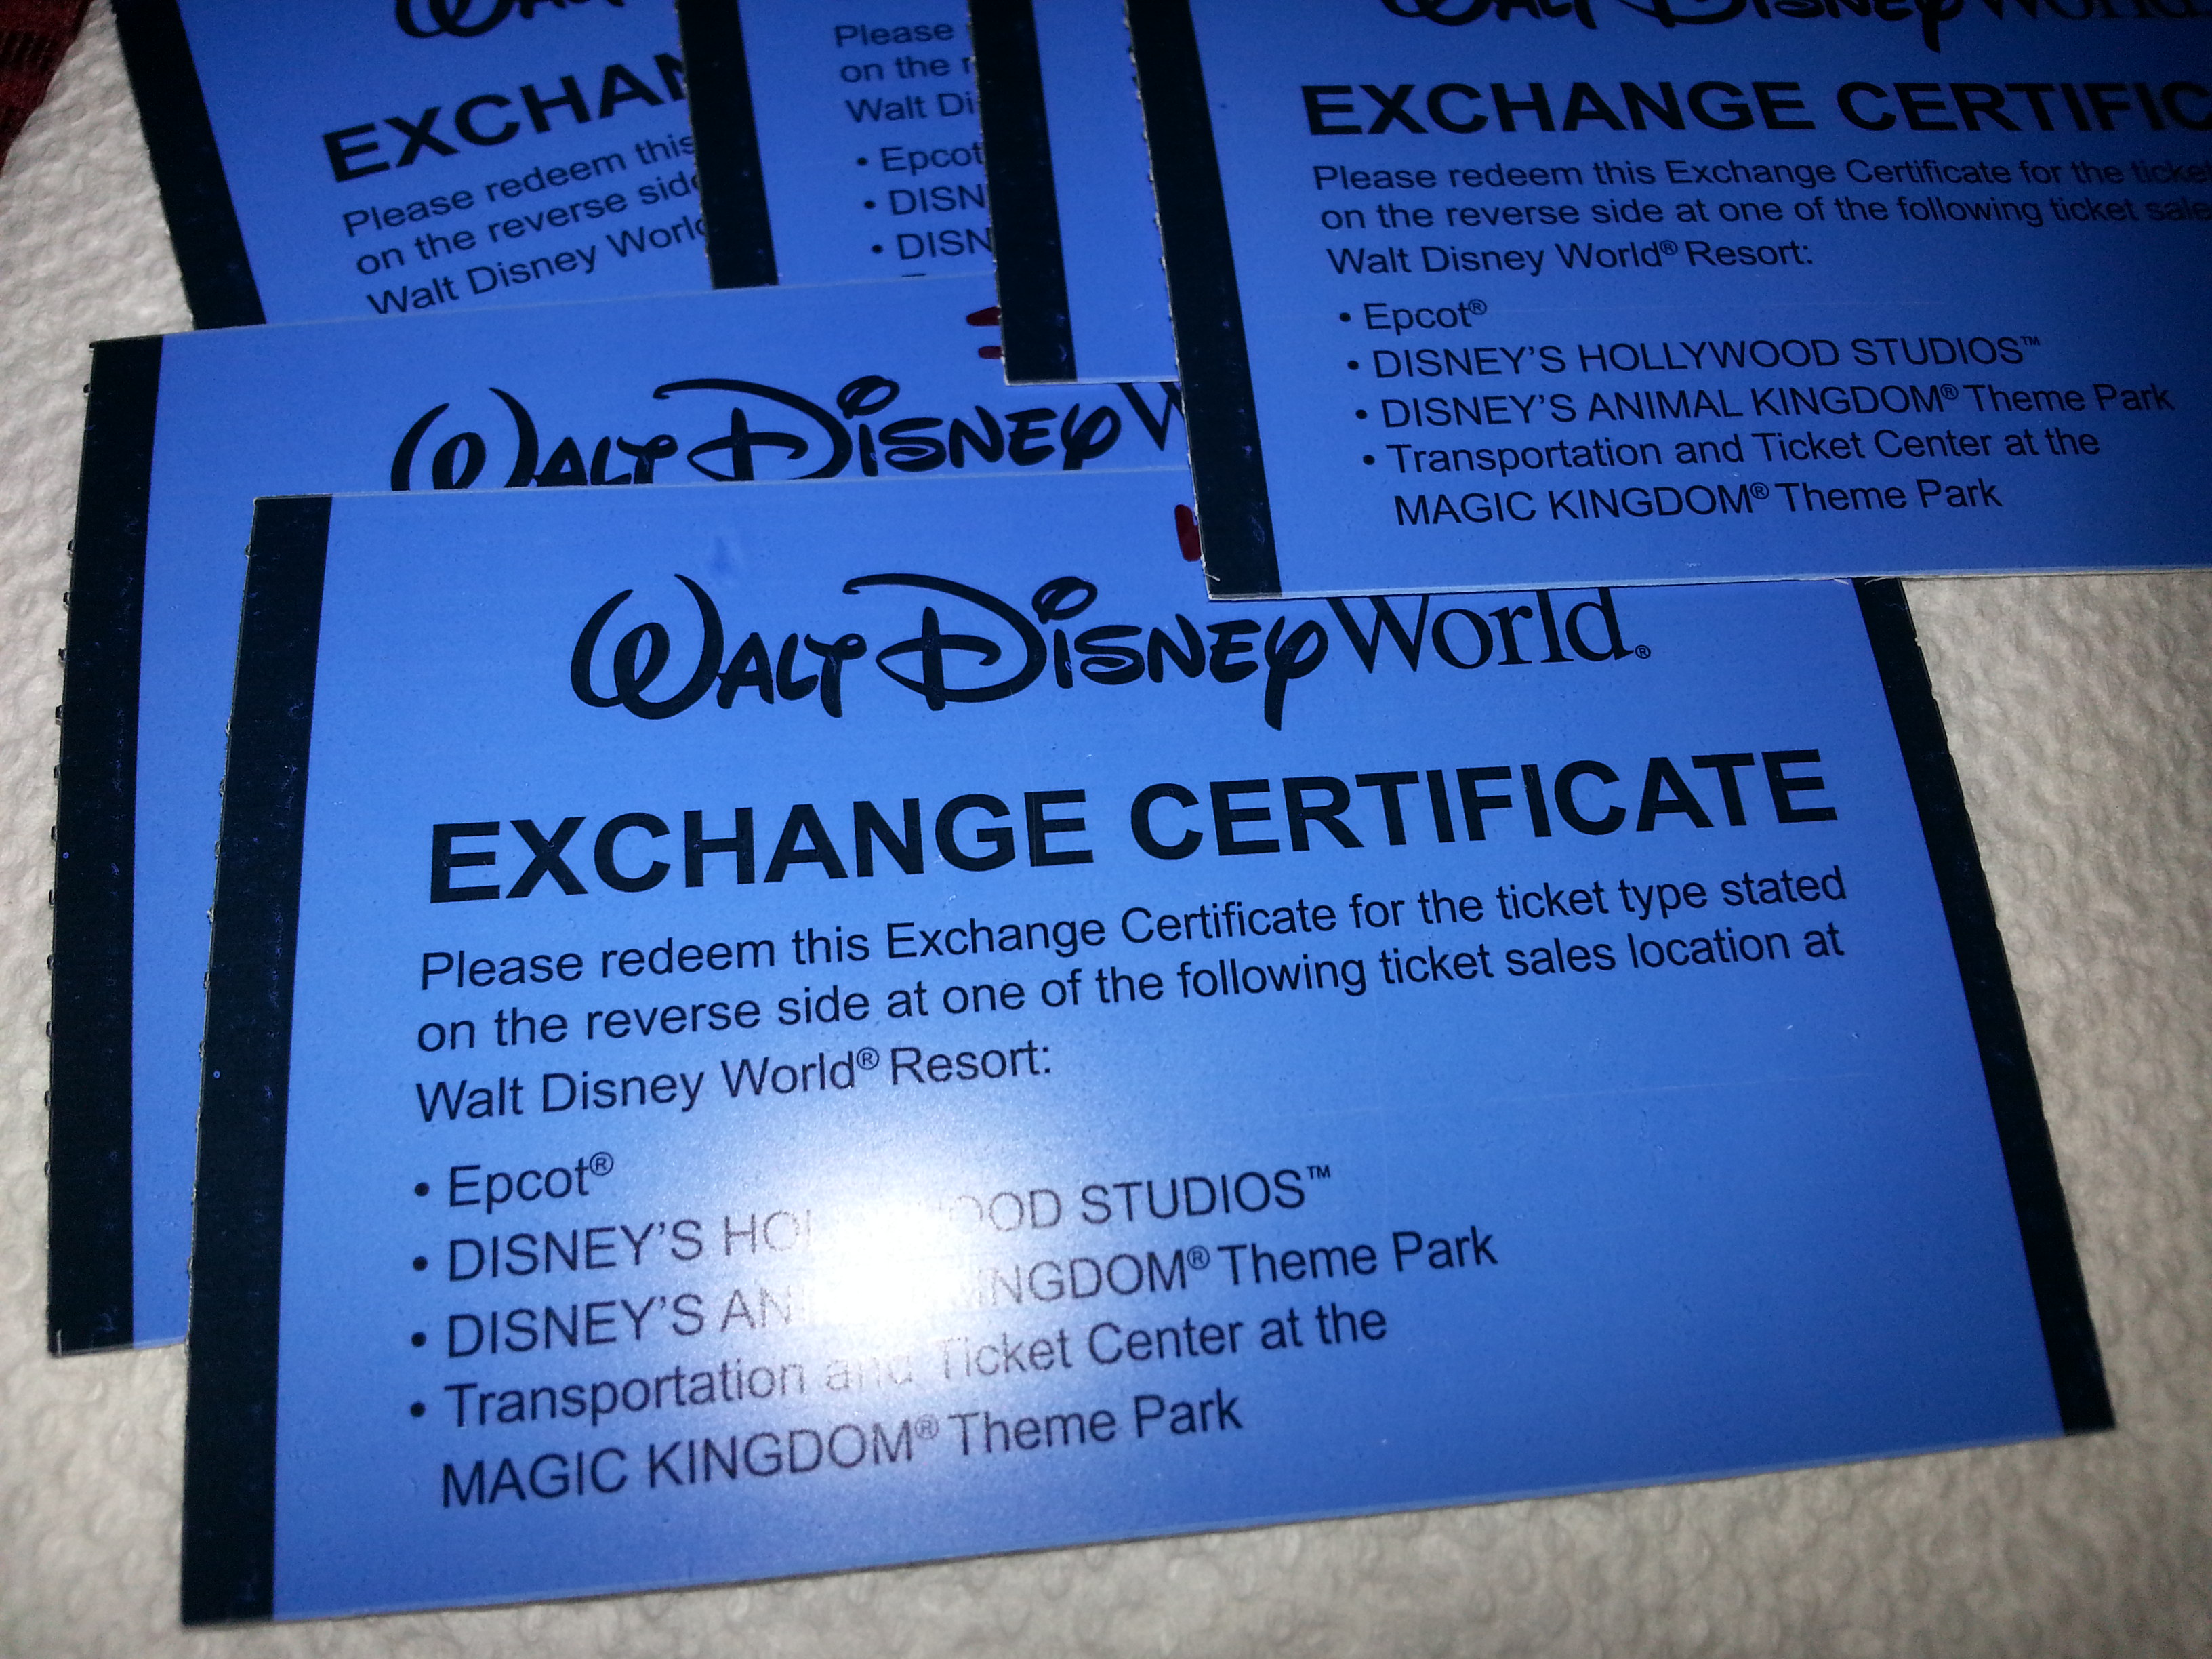 Disney World’s Armed Forces Salute Tickets and “mydisneyexperience”-Let’s link those vouchers!